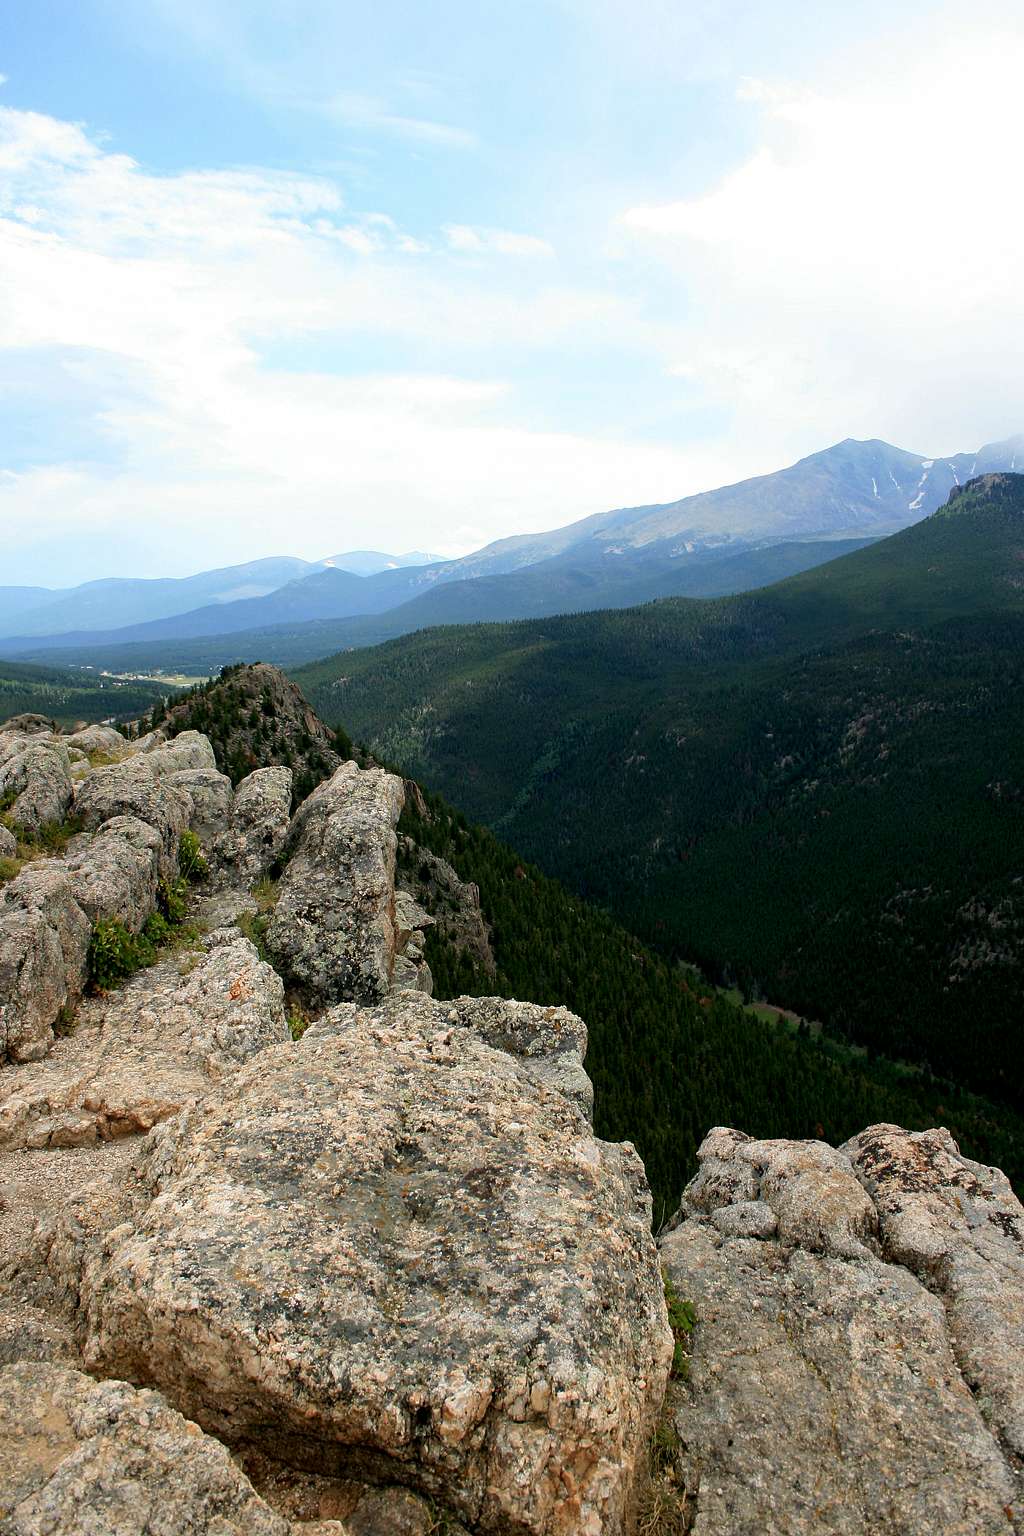 Looking to the southwest from the summit of Lily Mountain